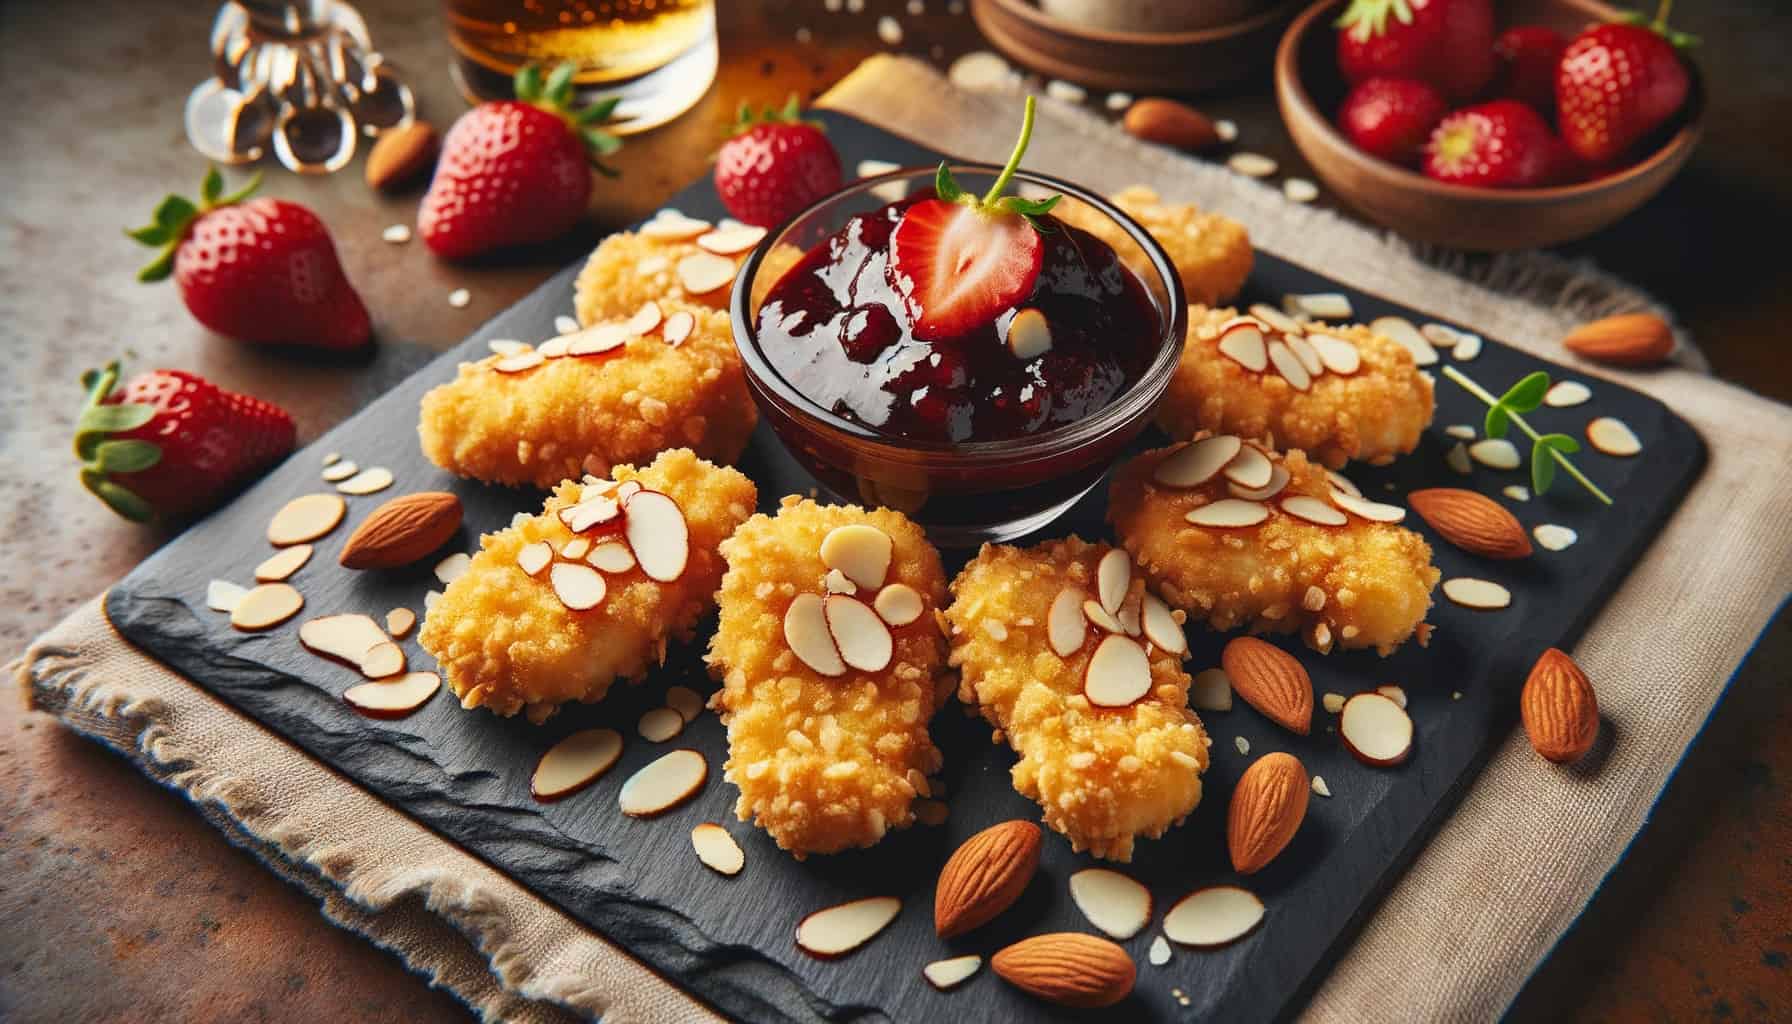 Almond encrusted chicken nuggets served on a slate platter. The chicken nuggets are golden and crunchy due to the almond crust, and they're paired with a strawberry balsamic sauce that glistens in the light. The sauce is presented in a small glass dish on the side, and some of it is artistically smeared on the slate.